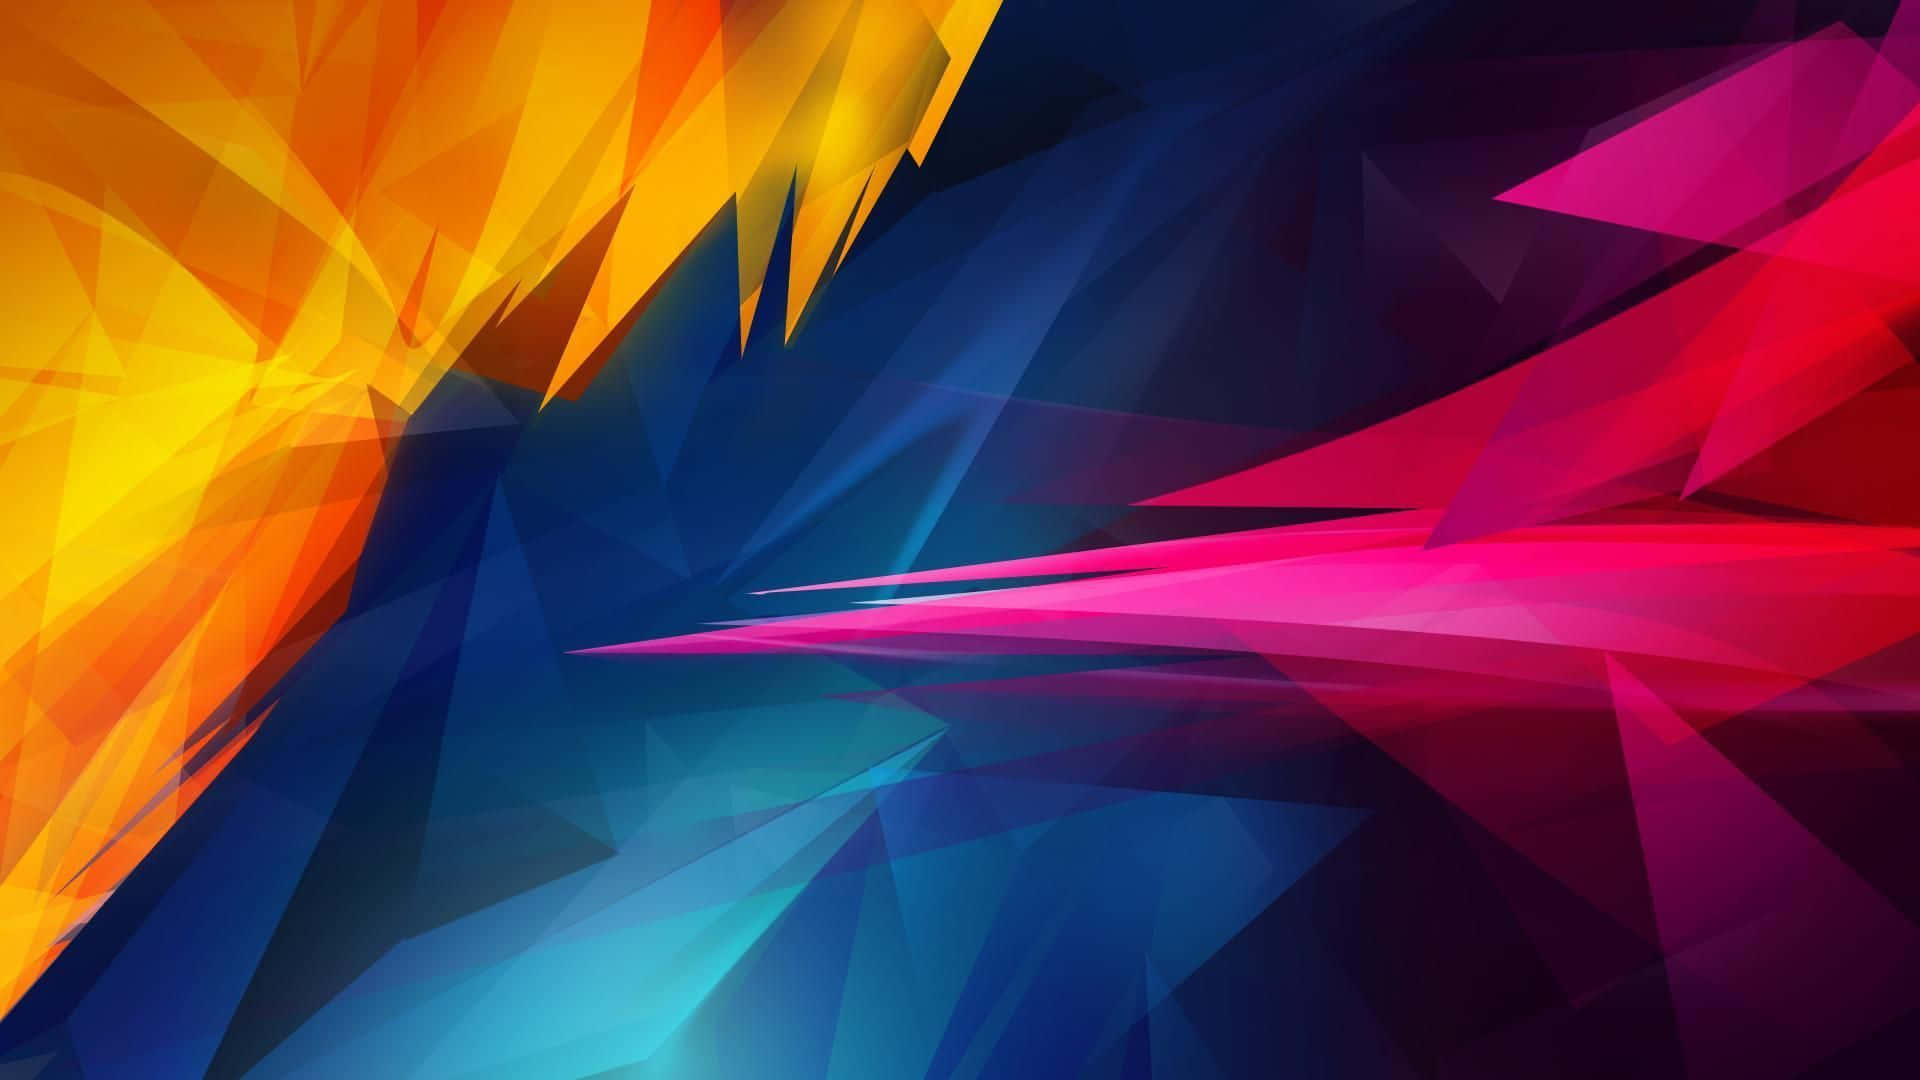 Abstract Graphic Design Background